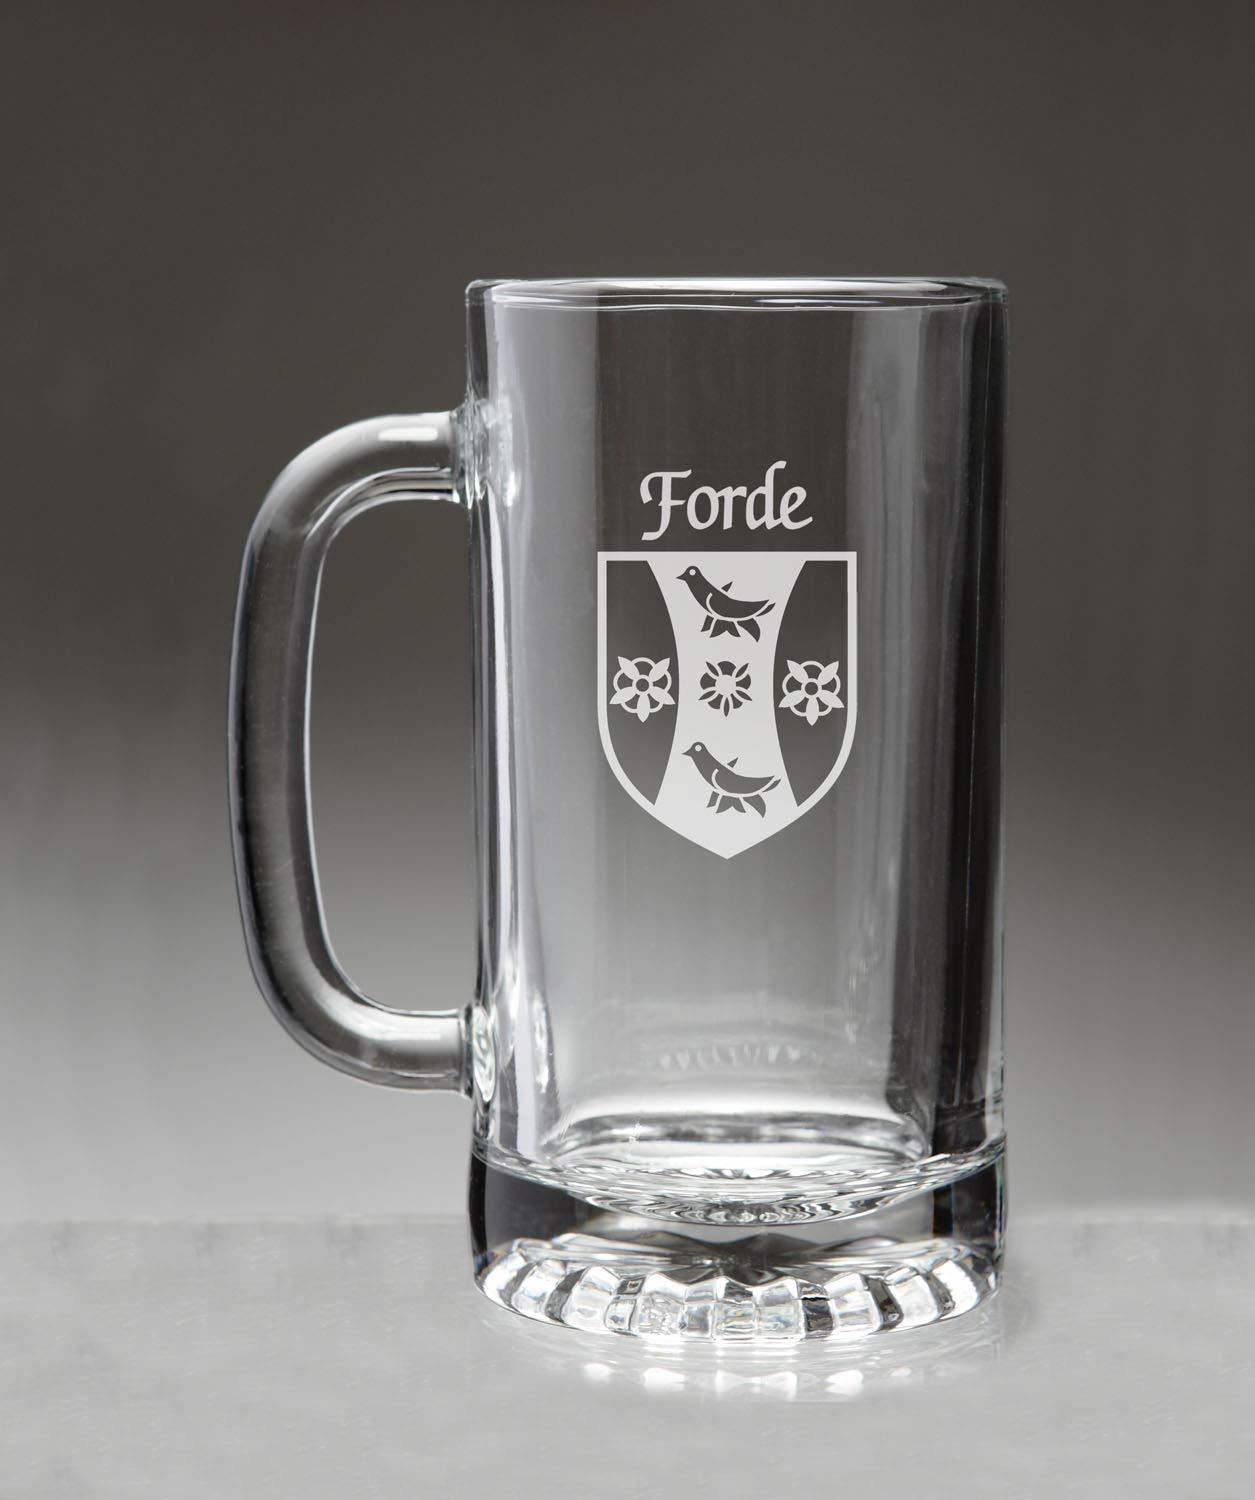 Primary image for Forde Irish Coat of Arms Glass Beer Mug (Sand Etched)